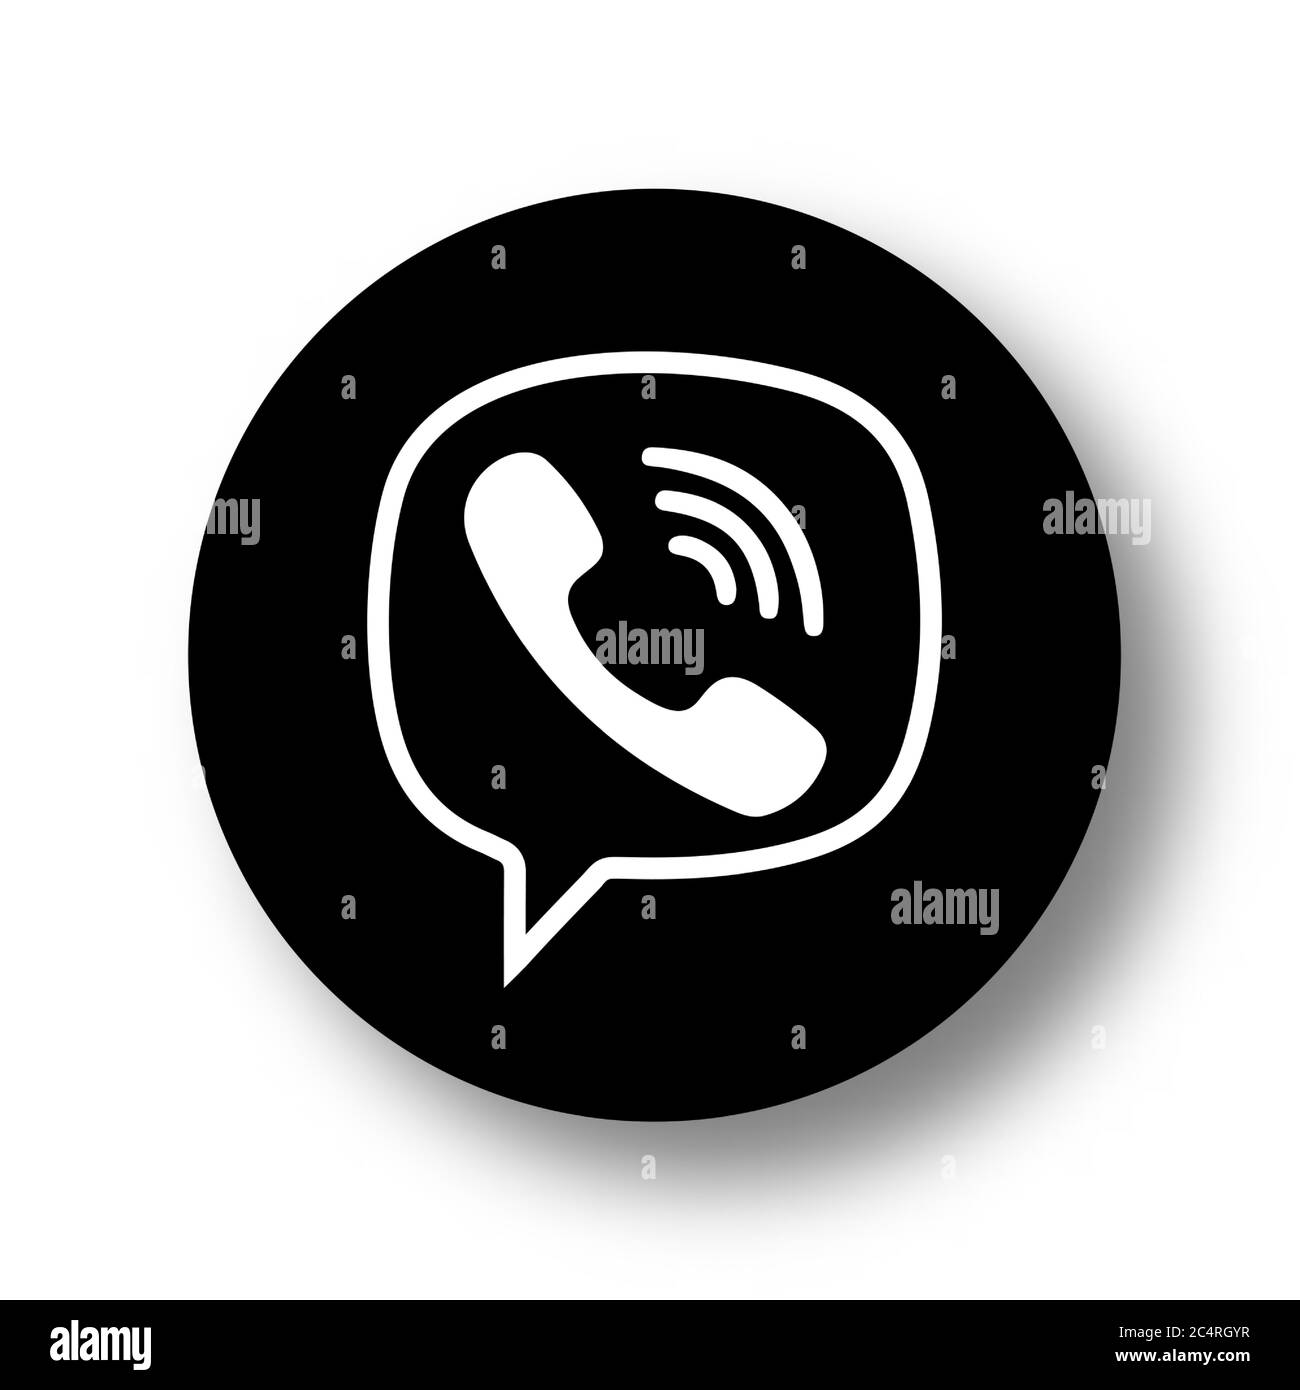 VORONEZH, RUSSIA - JANUARY 31, 2020: Viber logo black round icon with soft shadow Stock Vector